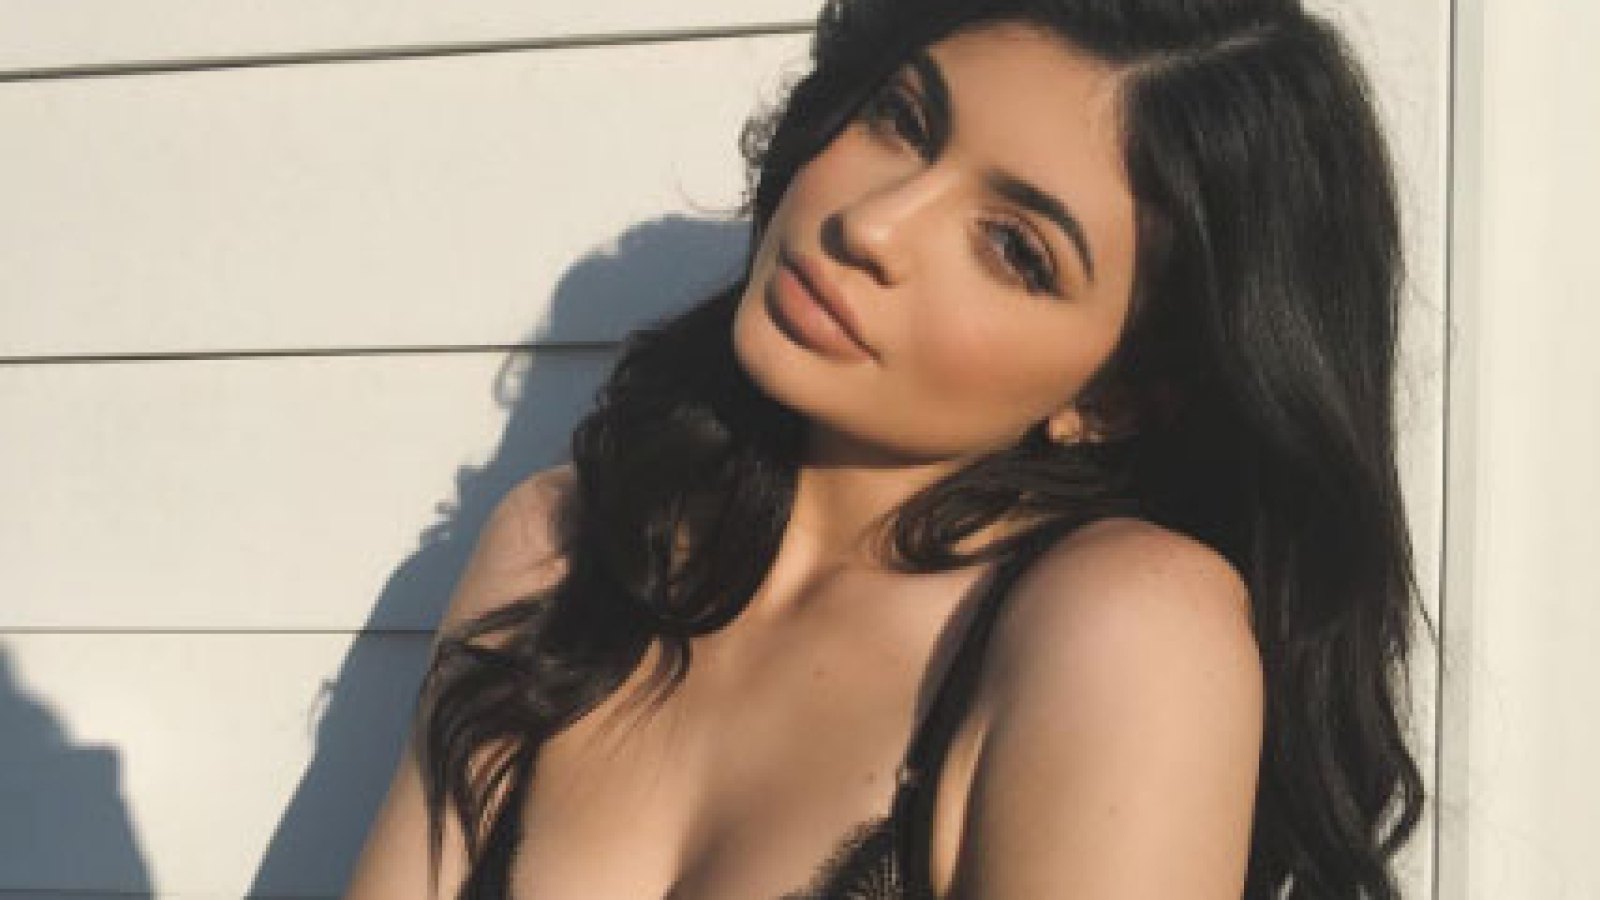 Kylie Jenner Showcases Cleavage in Black Bra Snaps